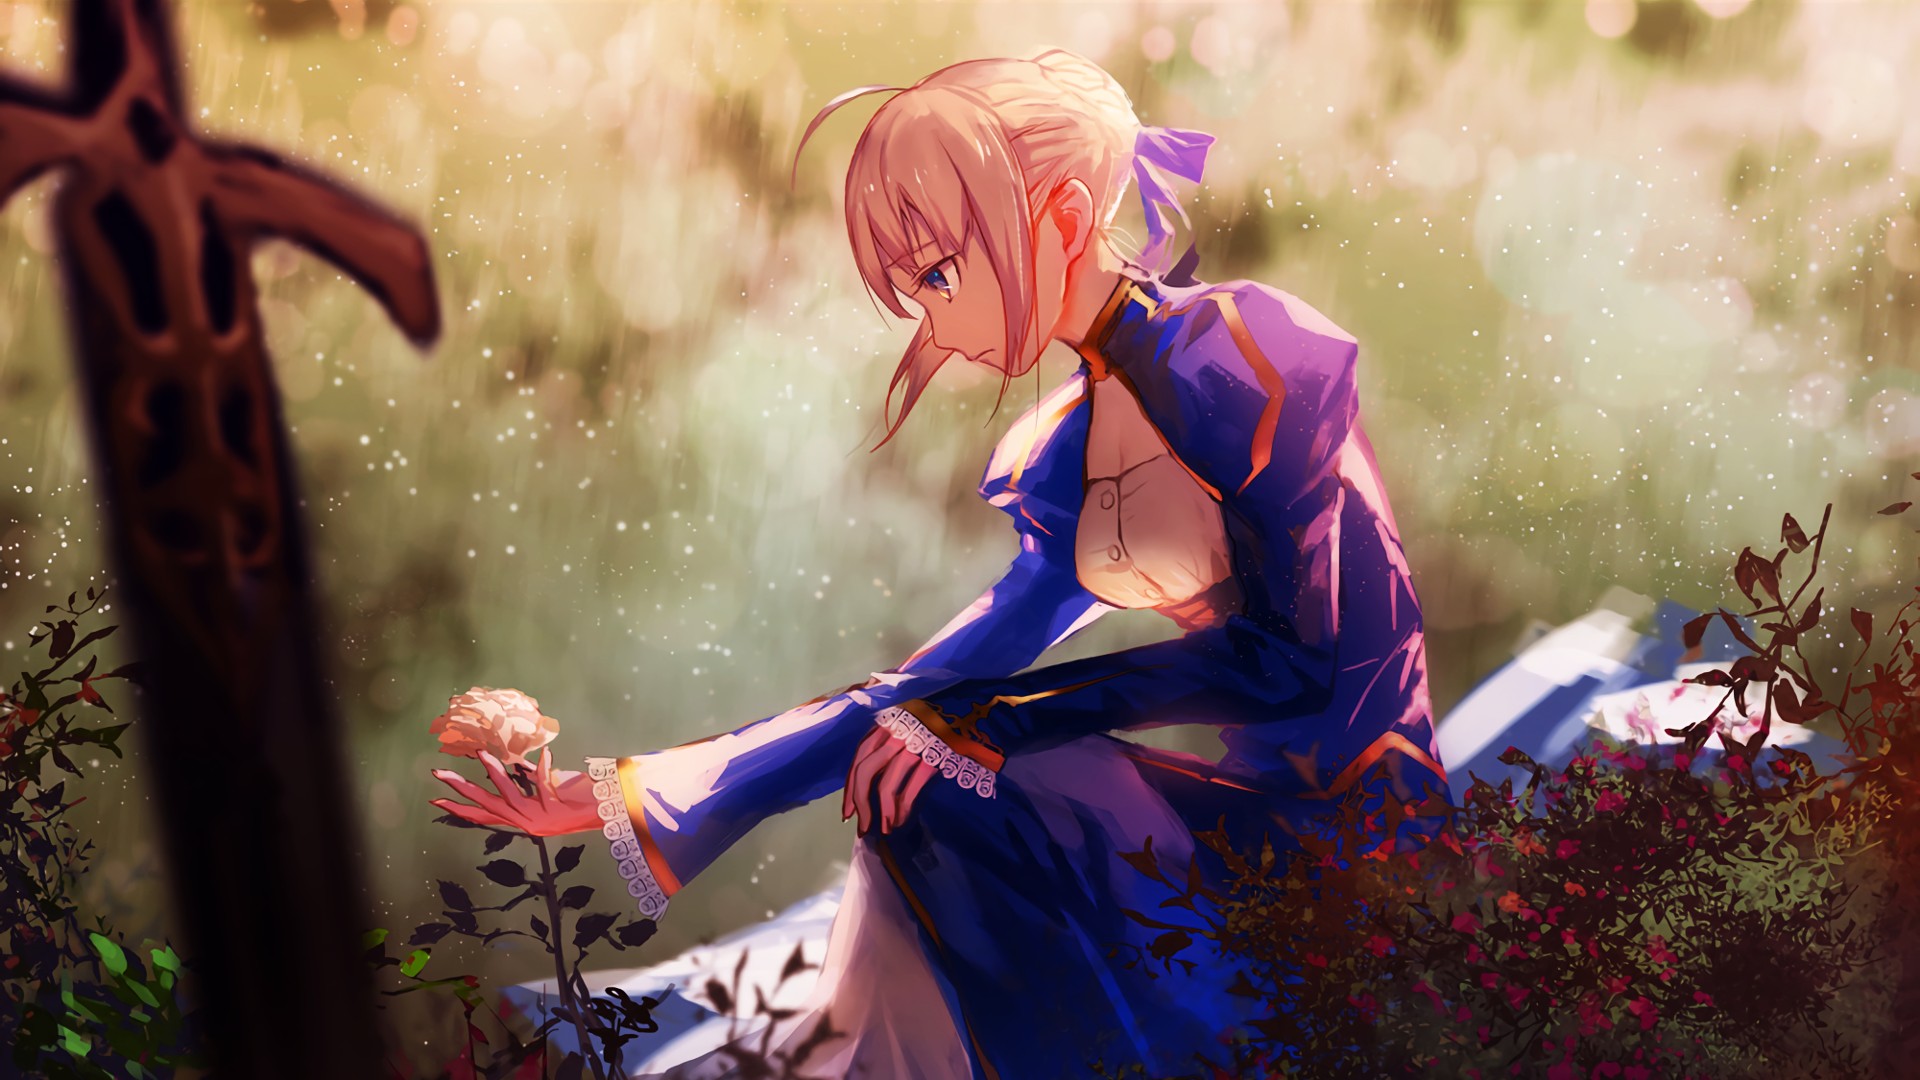 Fate Series, Fate Stay Night, Anime girls, Saber Wallpaper